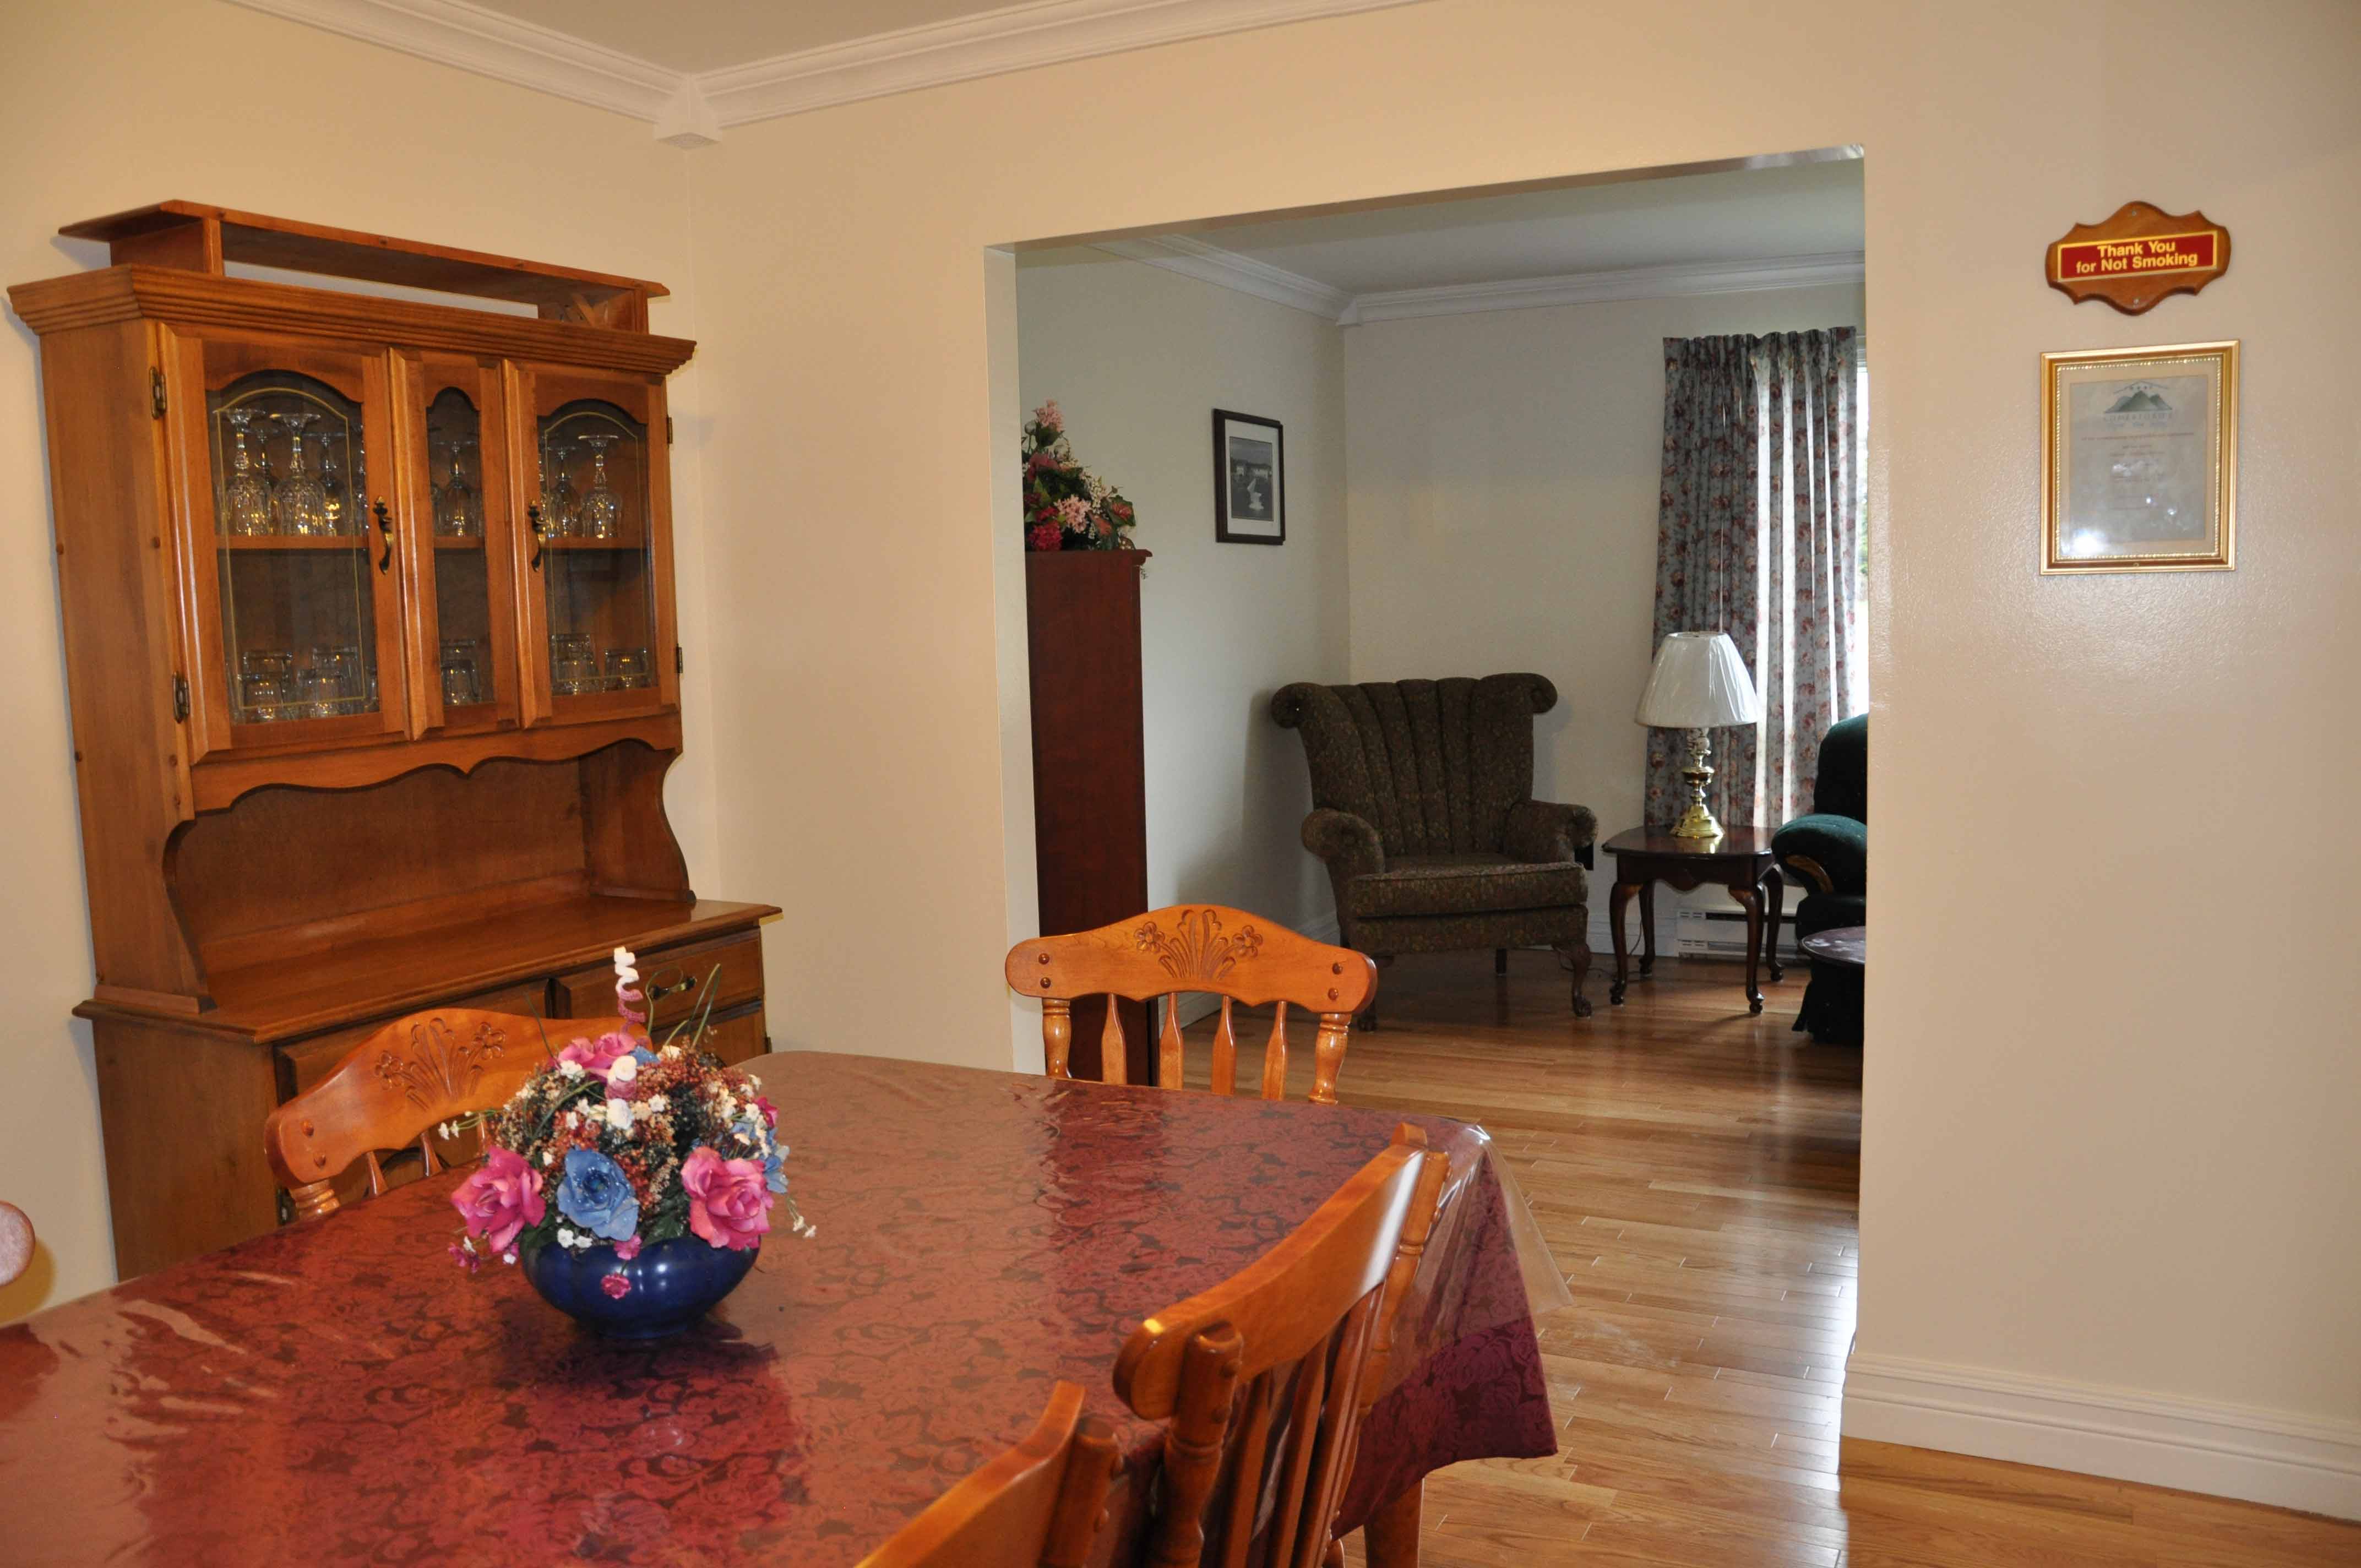 A comfortable size dining room with plenty of space for the family